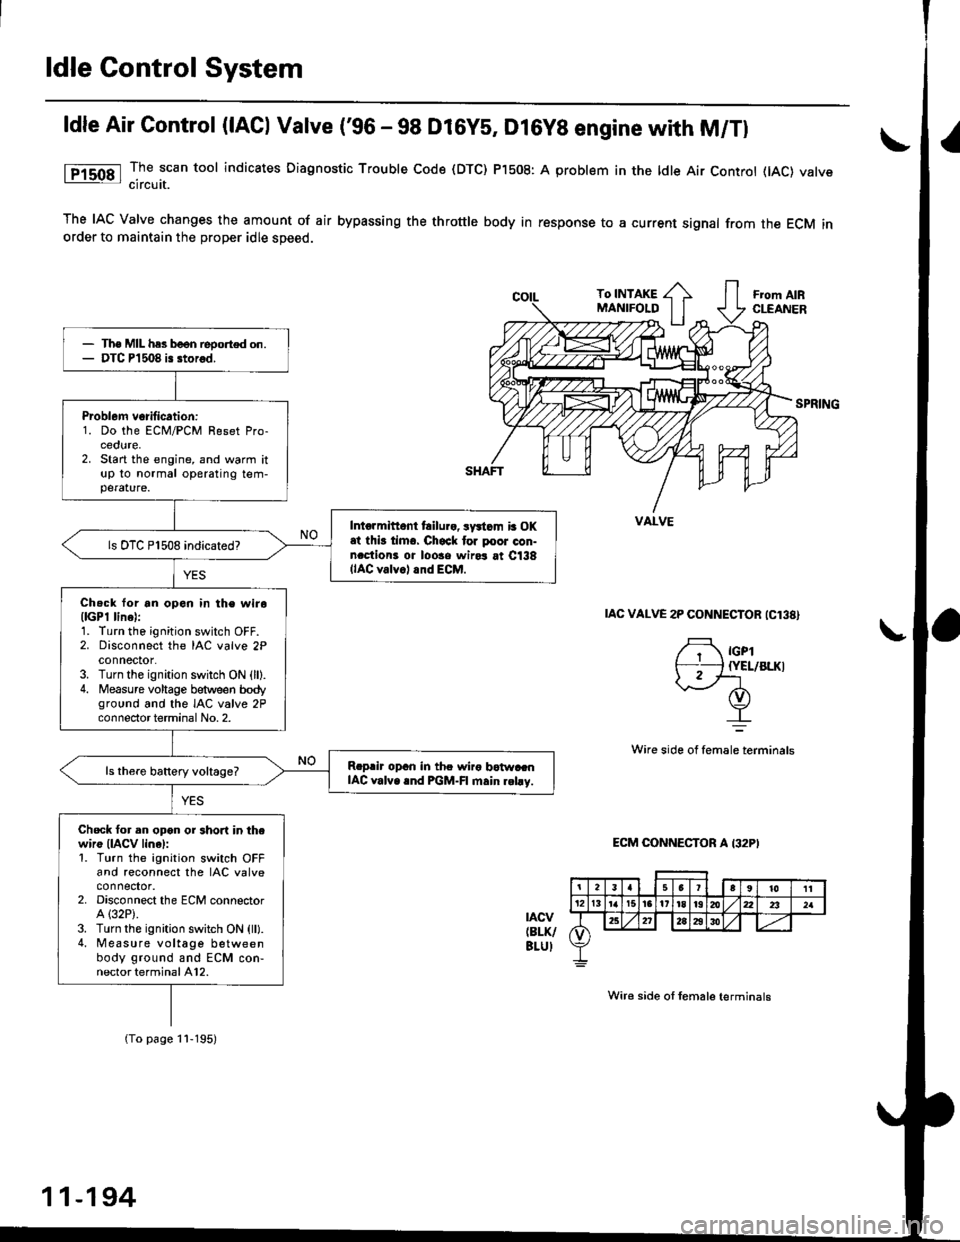 HONDA CIVIC 1996 6.G Service Manual ldle Control System
ldle Air Control (lACl Vatve (96 - 98 Dl6ys, Dl6yB engine with M/Tl
The scan tool indicates Diagnostic Trouble Code (DTC) P1508: A problem in the ldle Air Controt flAC) varvecircu